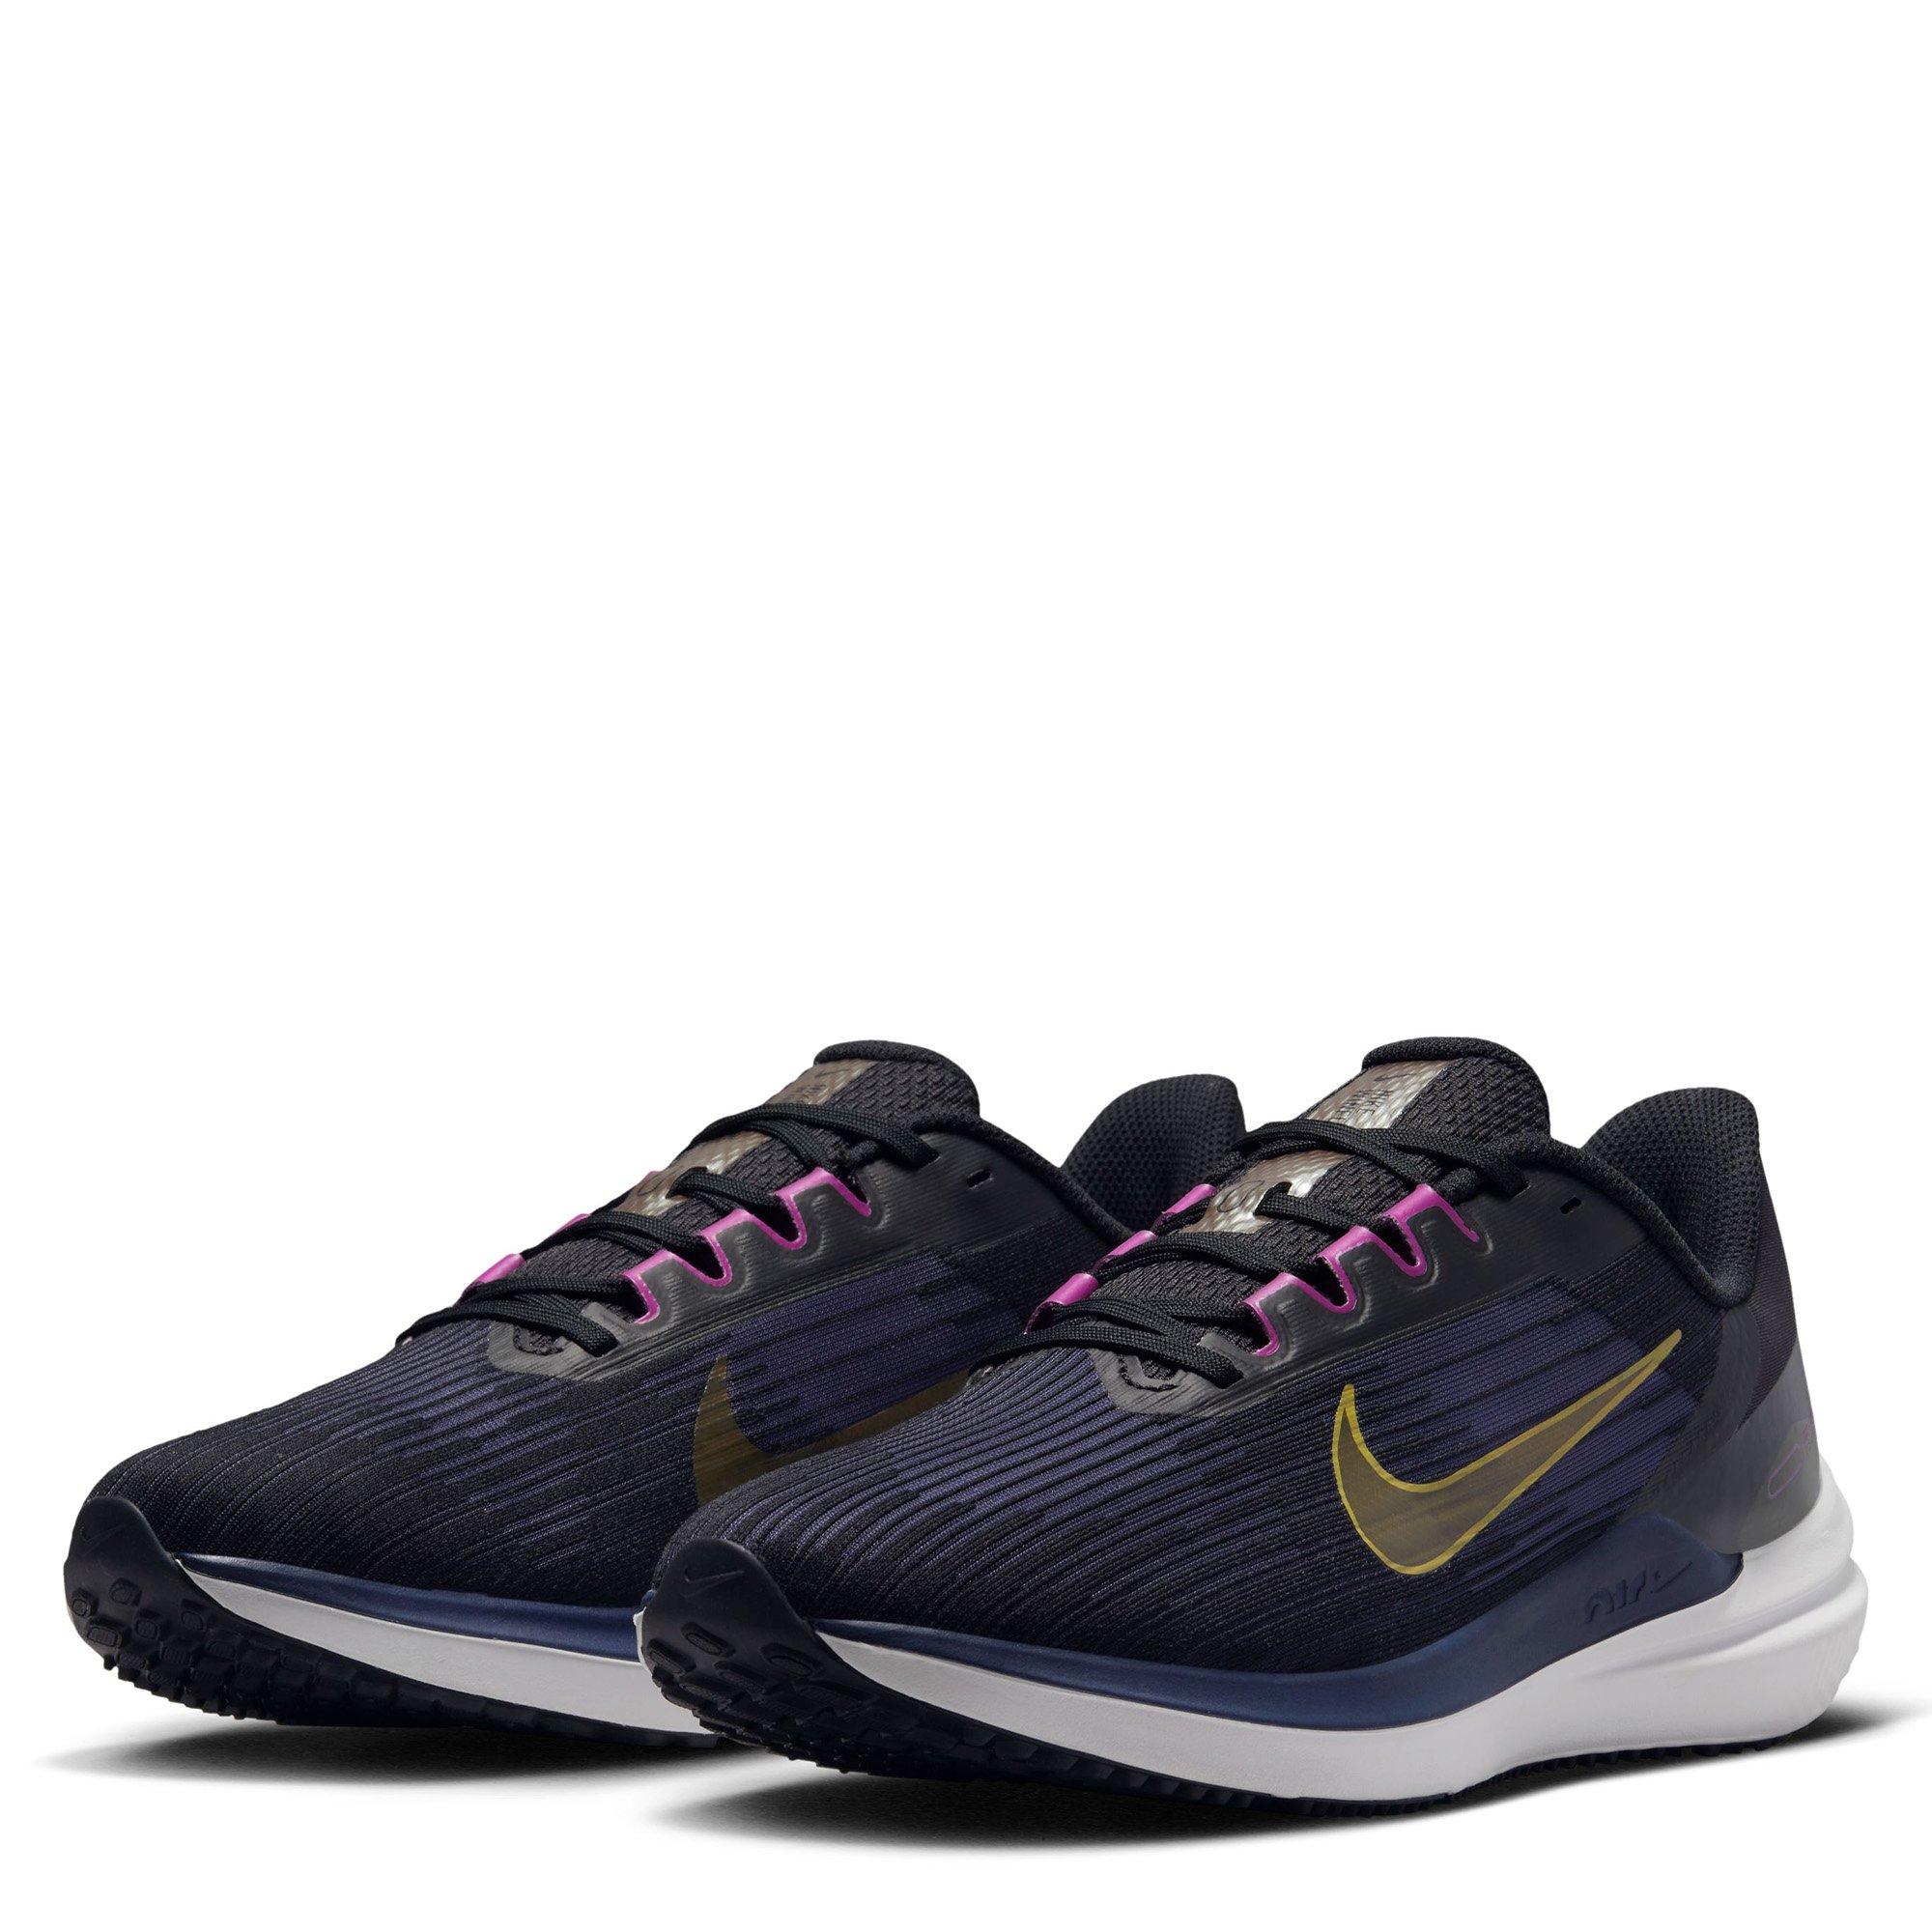 Nike | Air Winflo 9 Mens Running Shoes | Everyday Neutral Road Running ...